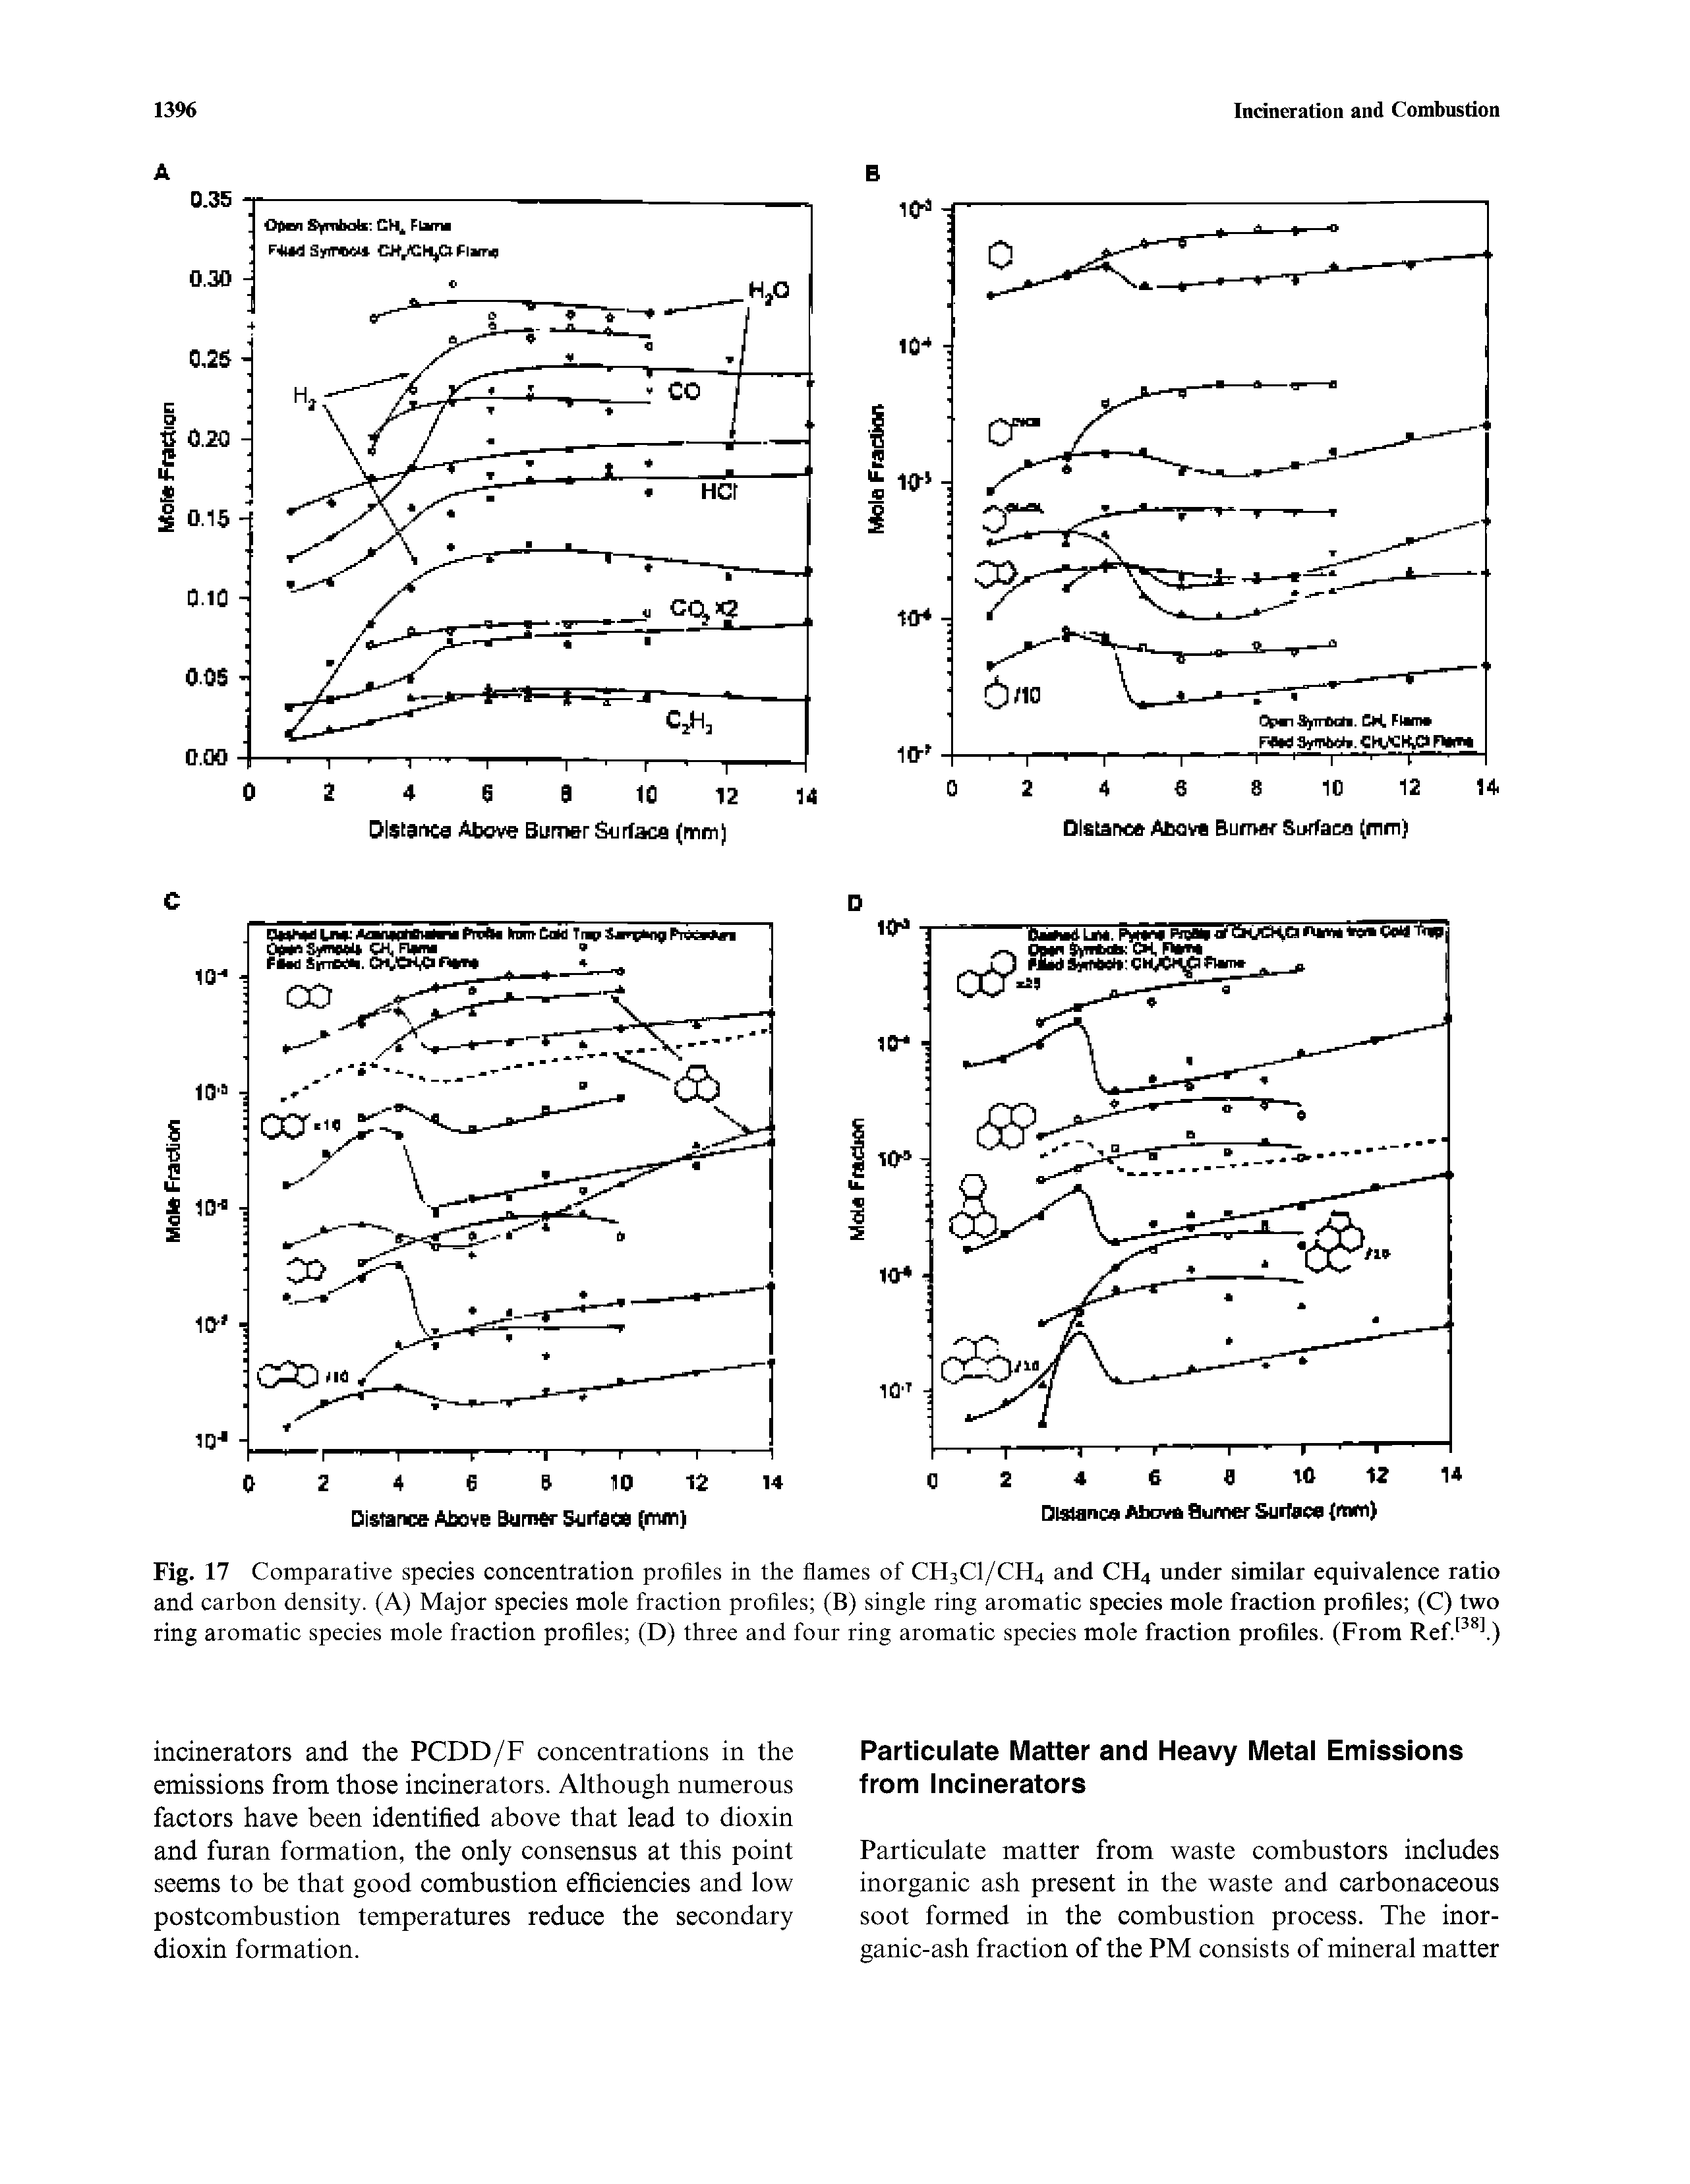 Fig. 17 Comparative species concentration profiles in the flames of CH3CI/CH4 and CH4 under similar equivalence ratio and carbon density. (A) Major species mole fraction profiles (B) single ring aromatic species mole fraction profiles (C) two ring aromatic species mole fraction profiles (D) three and four ring aromatic species mole fraction profiles. (From Ref. l)...